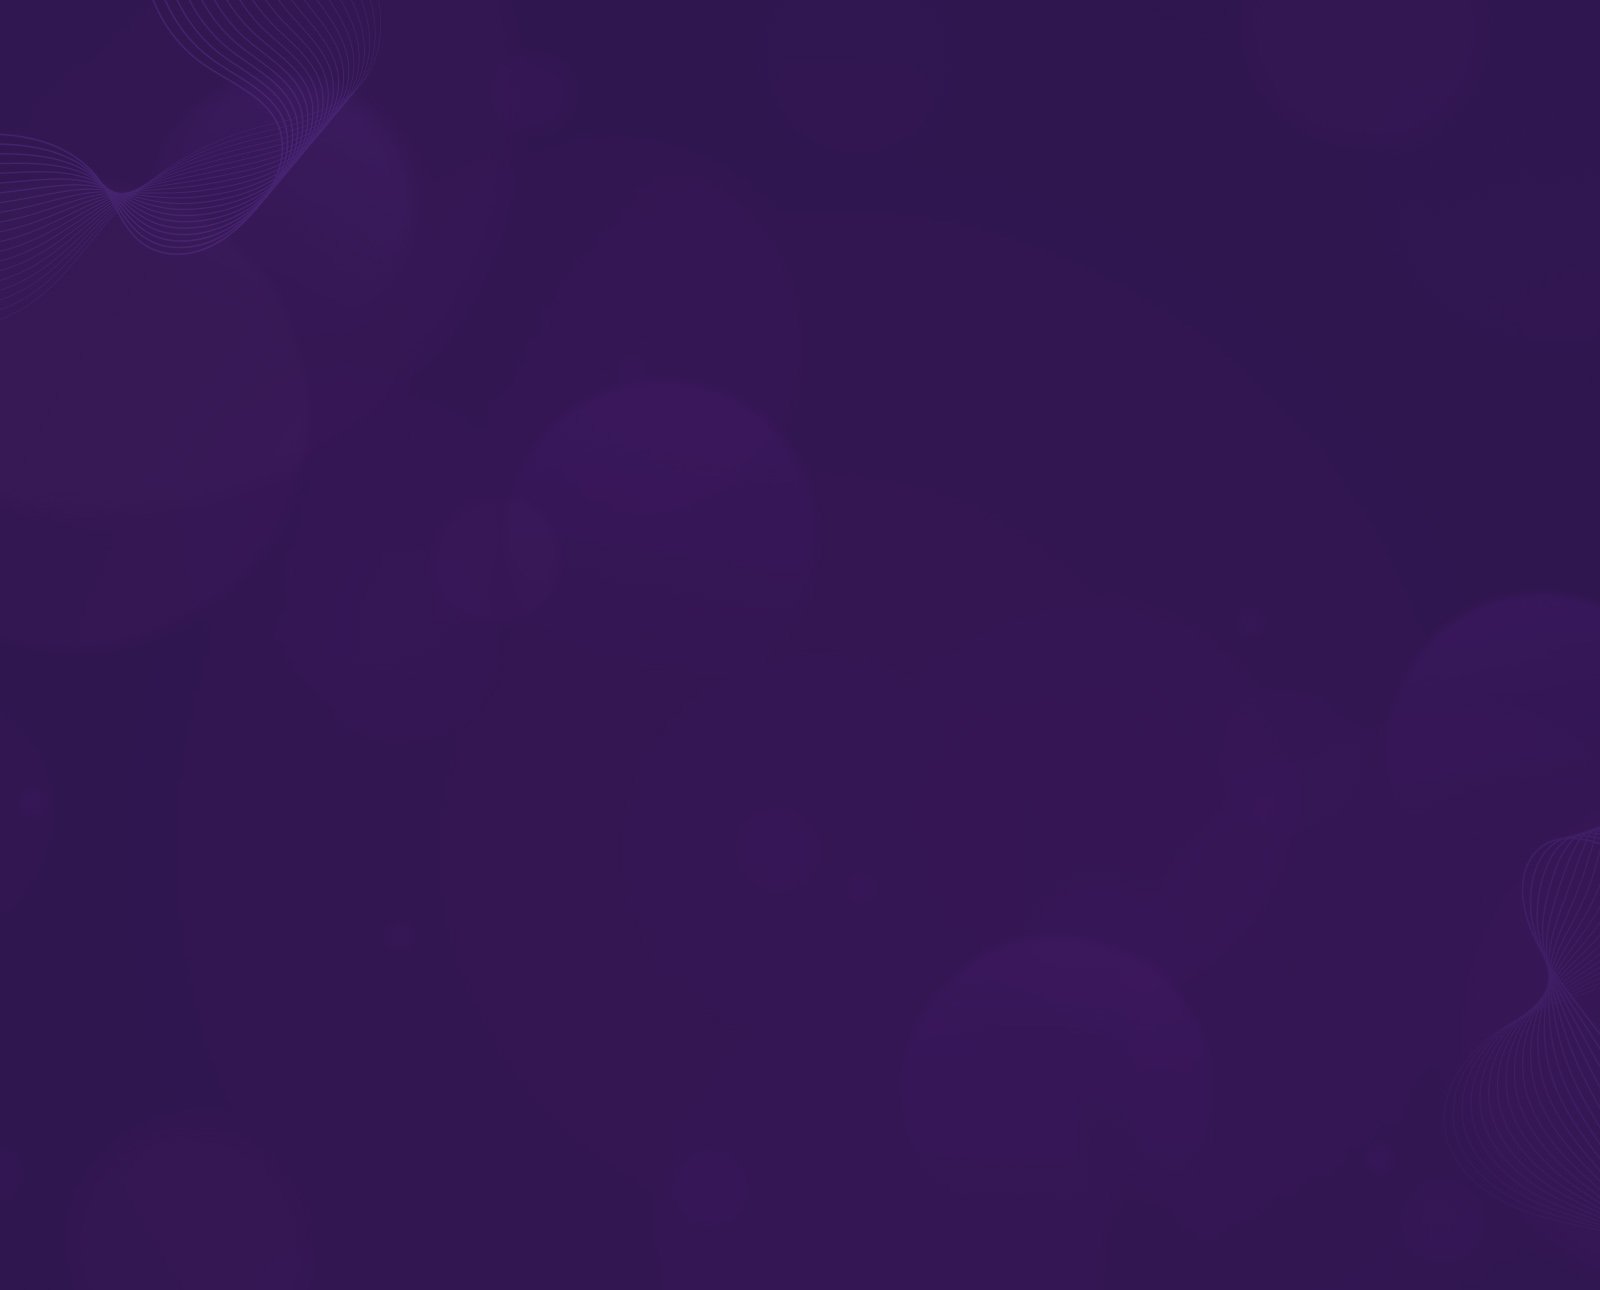 section-3-purple-background